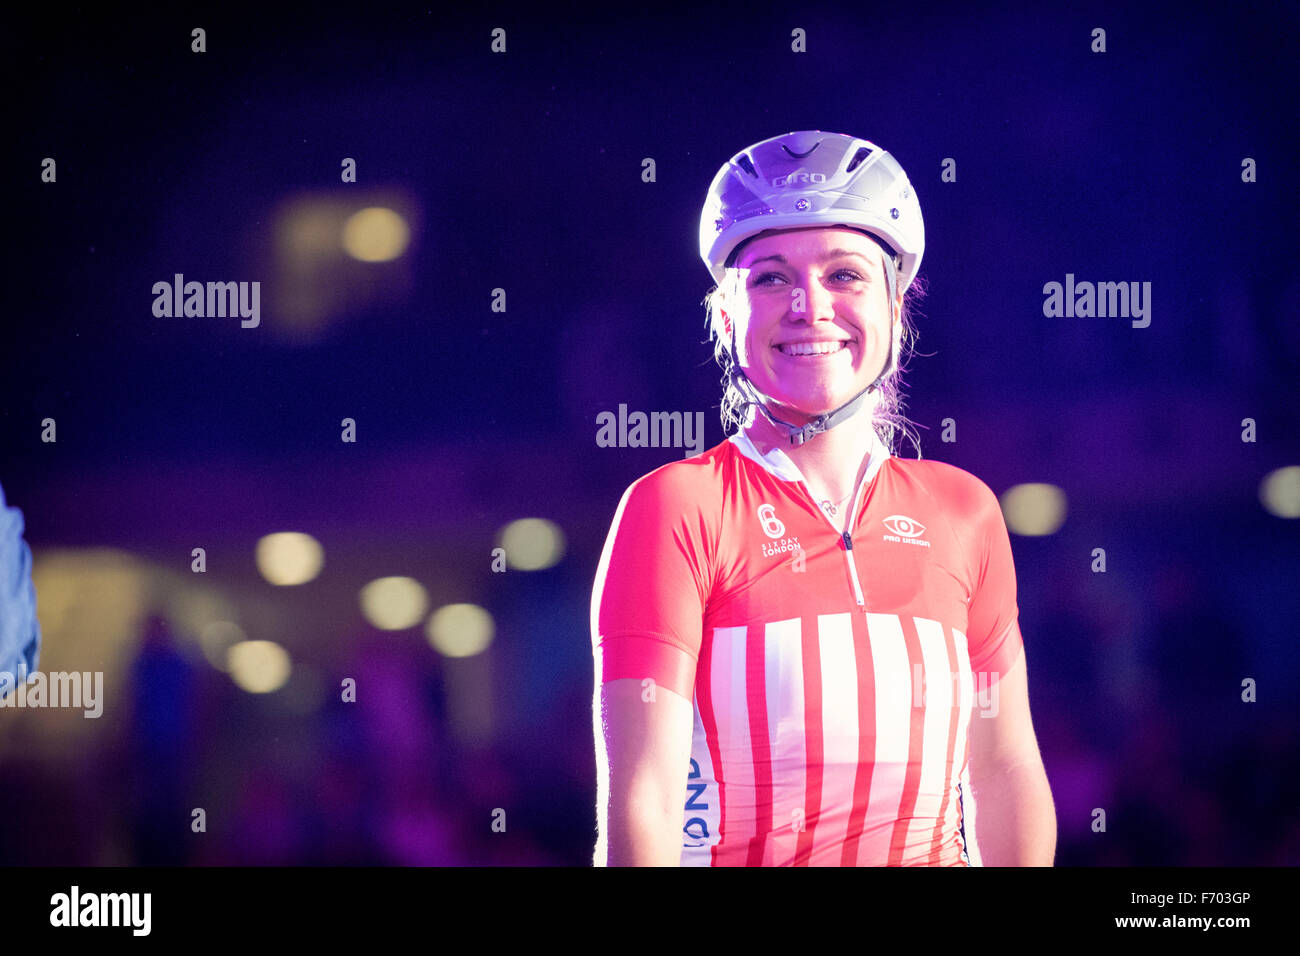 2015 event winner Malgorzata Wojtyra at the London Six Day cycling event at Lee Valley Velopark, London, UK, on 23 October 2015. Stock Photo